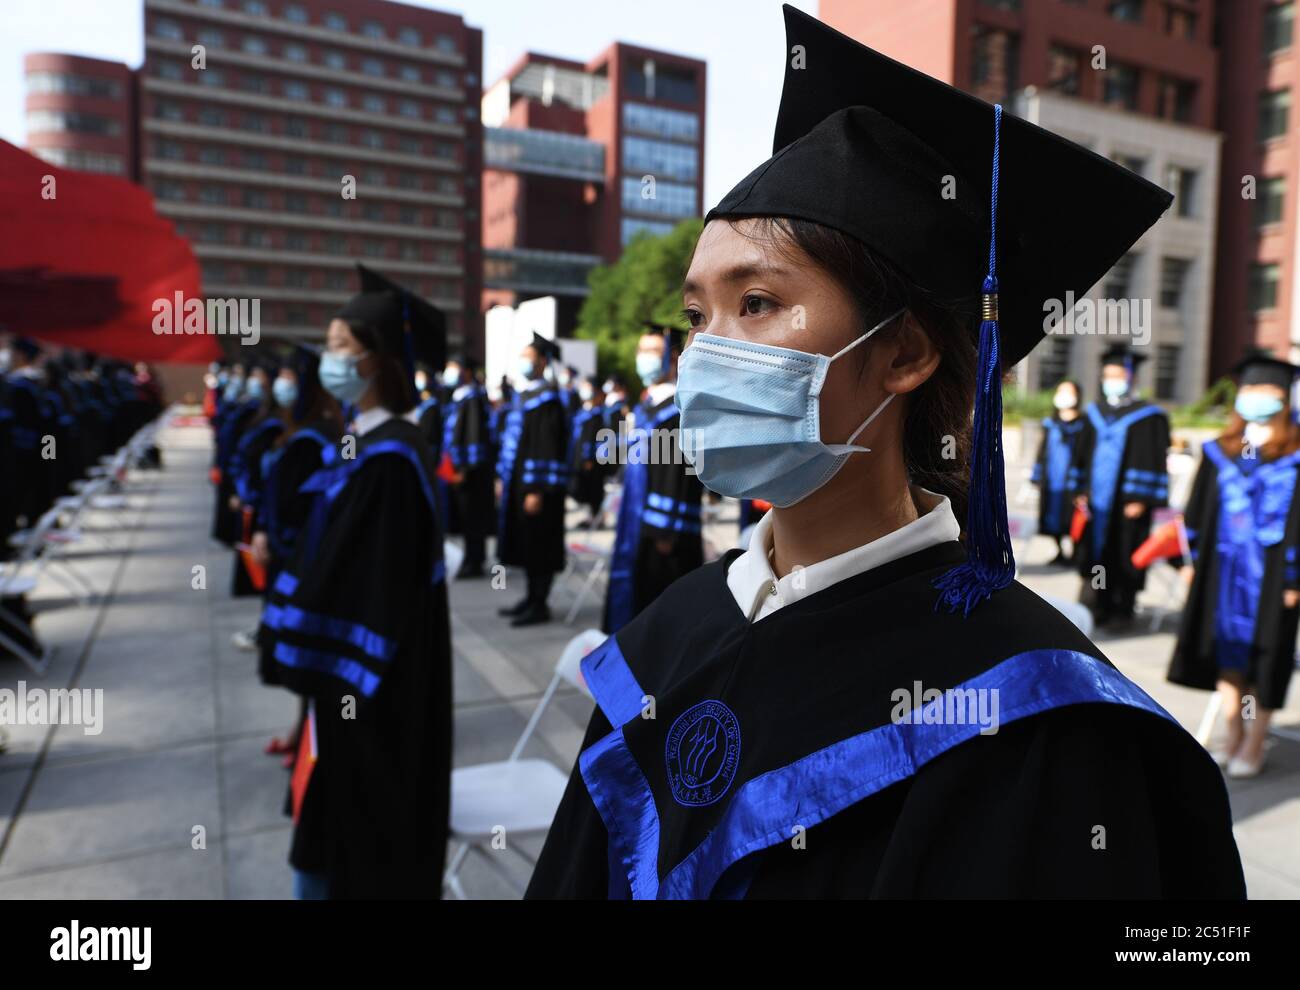 Beijing, China. 30th June, 2020. Graduates attend the commencement ceremony of Renmin University of China in Beijing, capital of China, June 30, 2020. Renmin University of China held a commencement ceremony for the graduates of 2020 on Tuesday. In order to reduce the risk of infection of COVID-19, only a minority of graduates attended the ceremony on site with the others attending online. Credit: Ren Chao/Xinhua/Alamy Live News Stock Photo